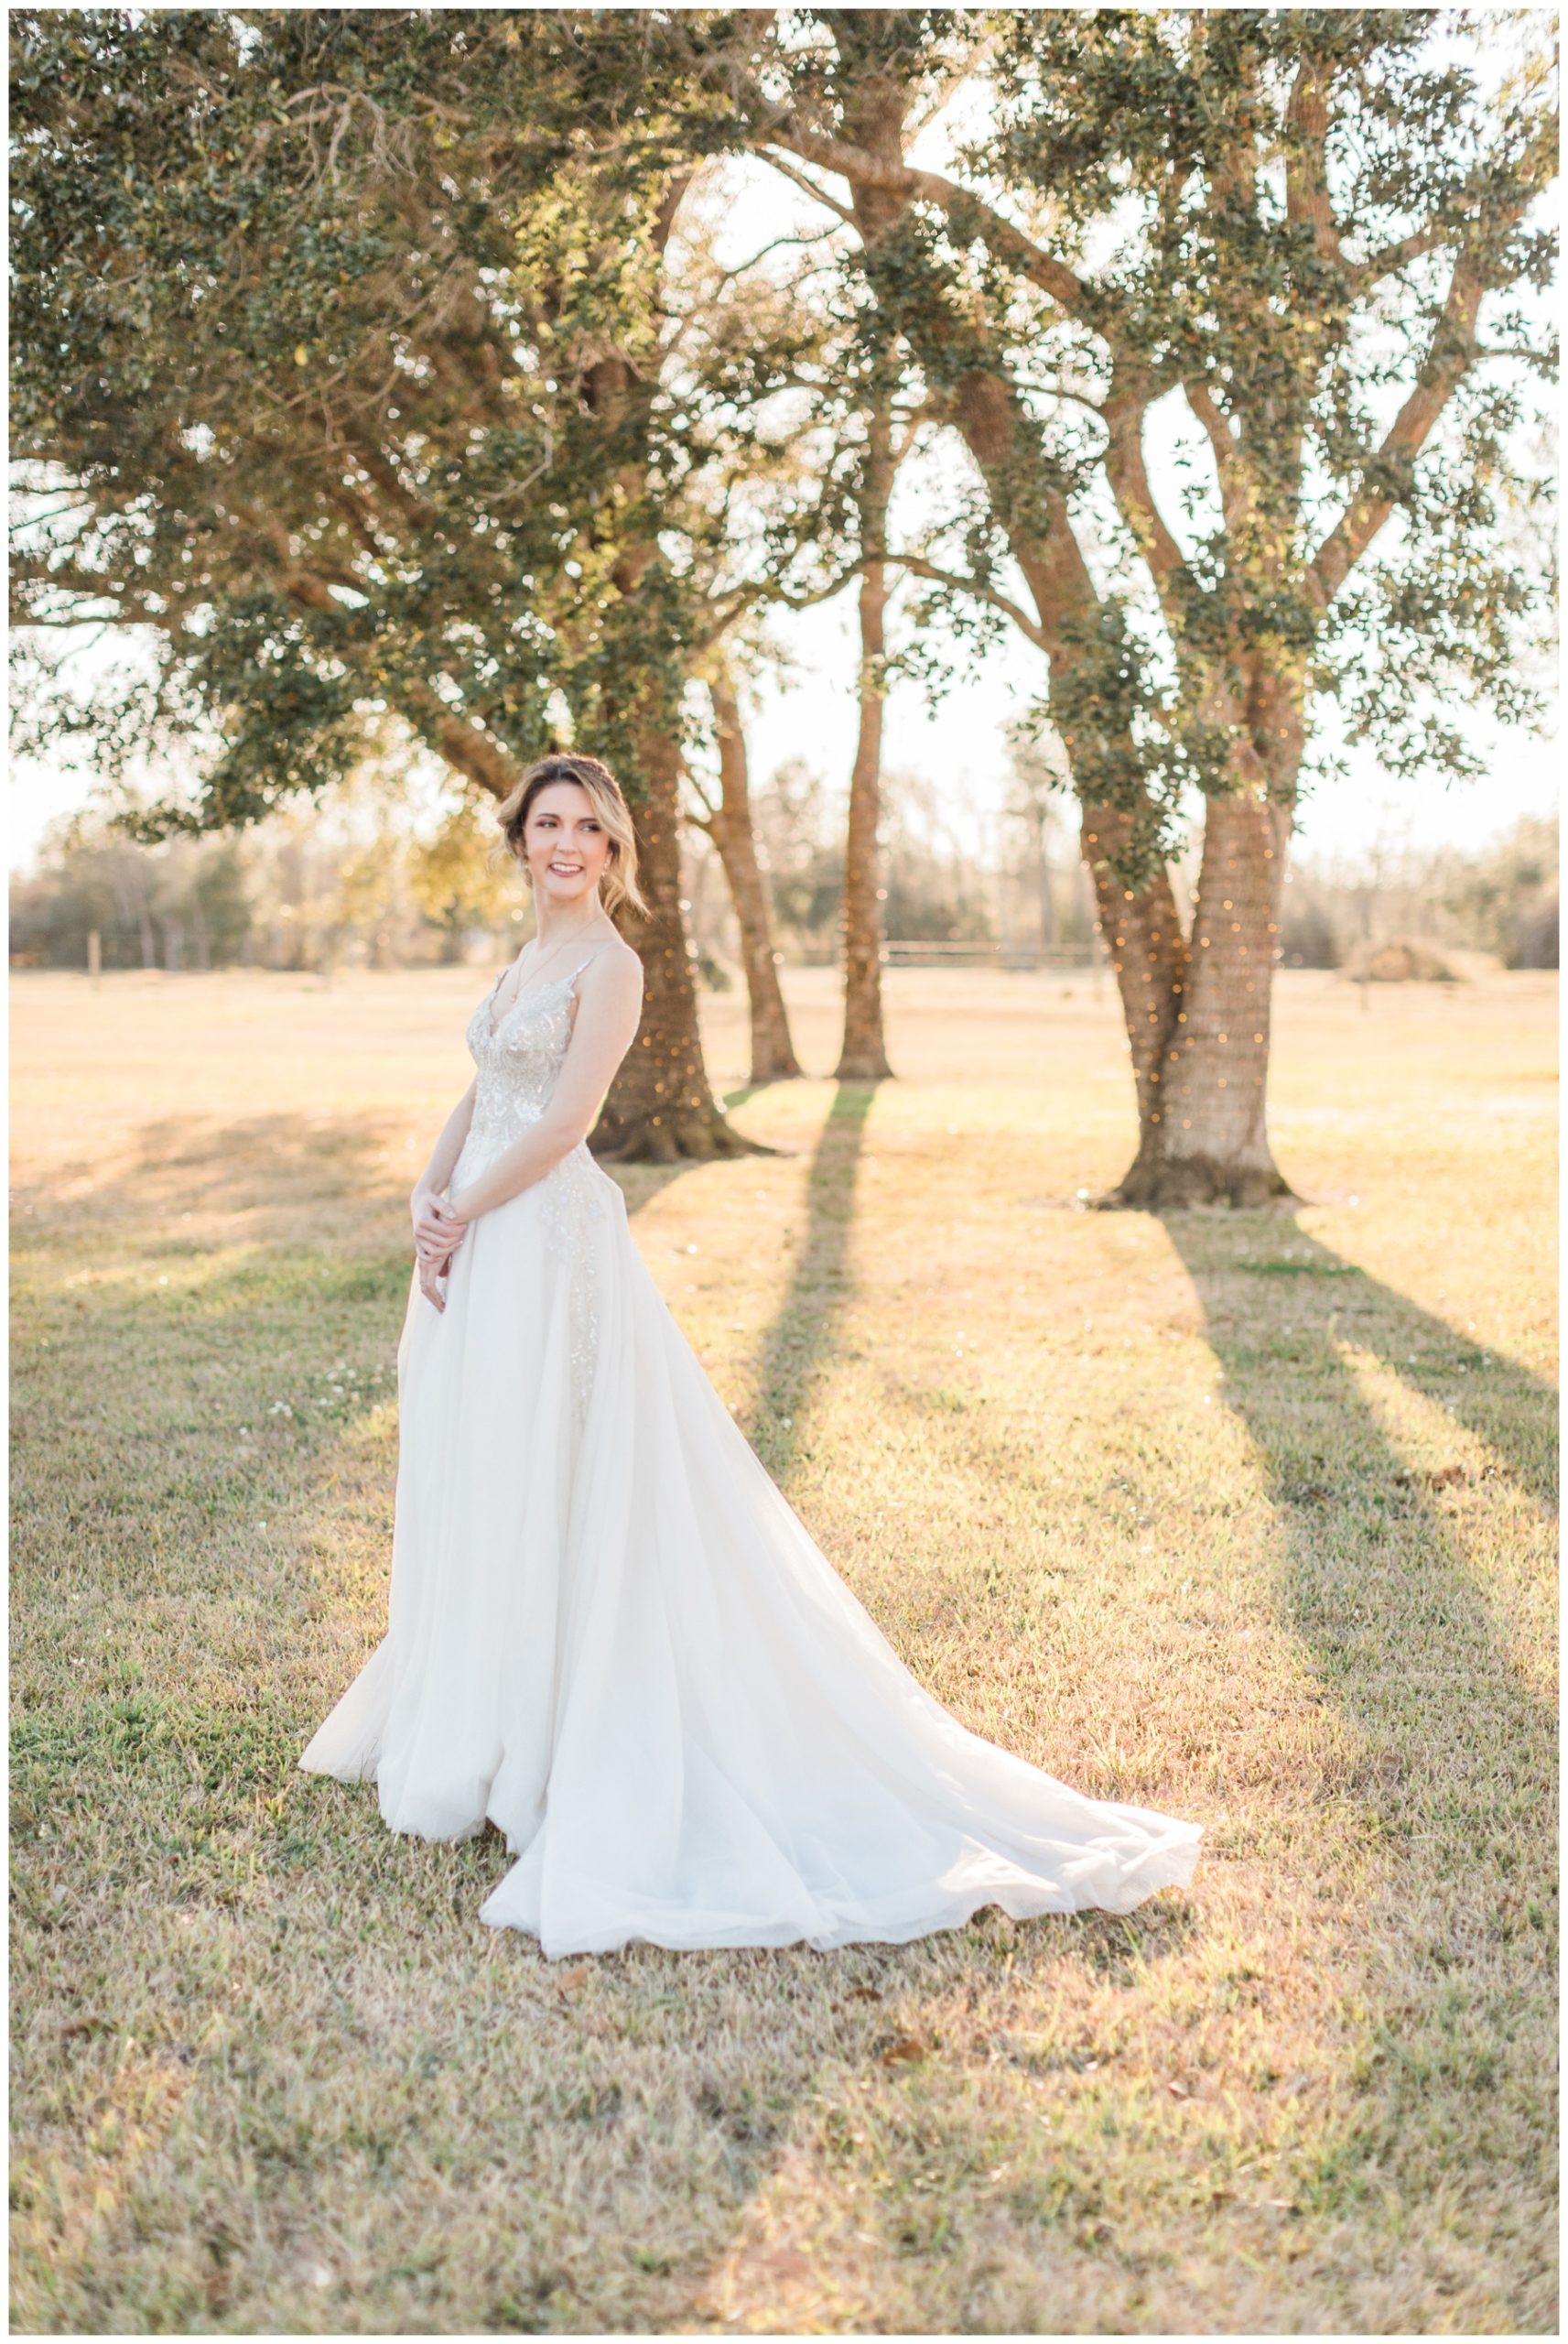 Bridal session at golden hour at Willowynn Barn